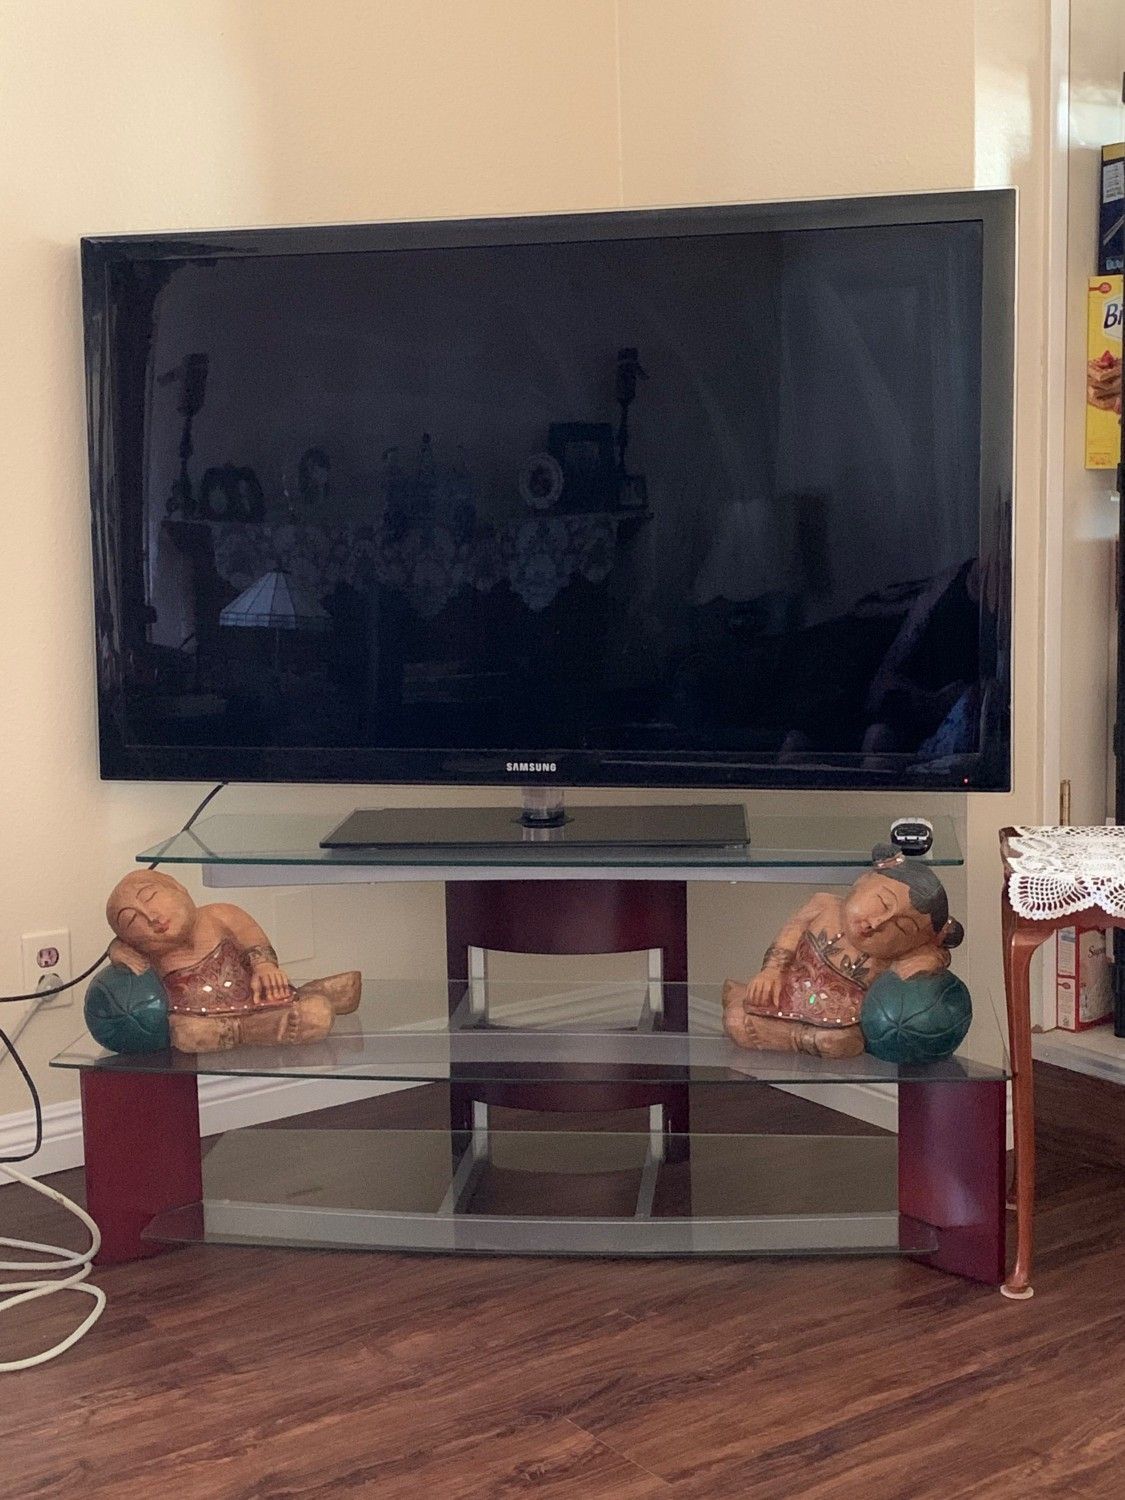 Samsung 55" TV and stand